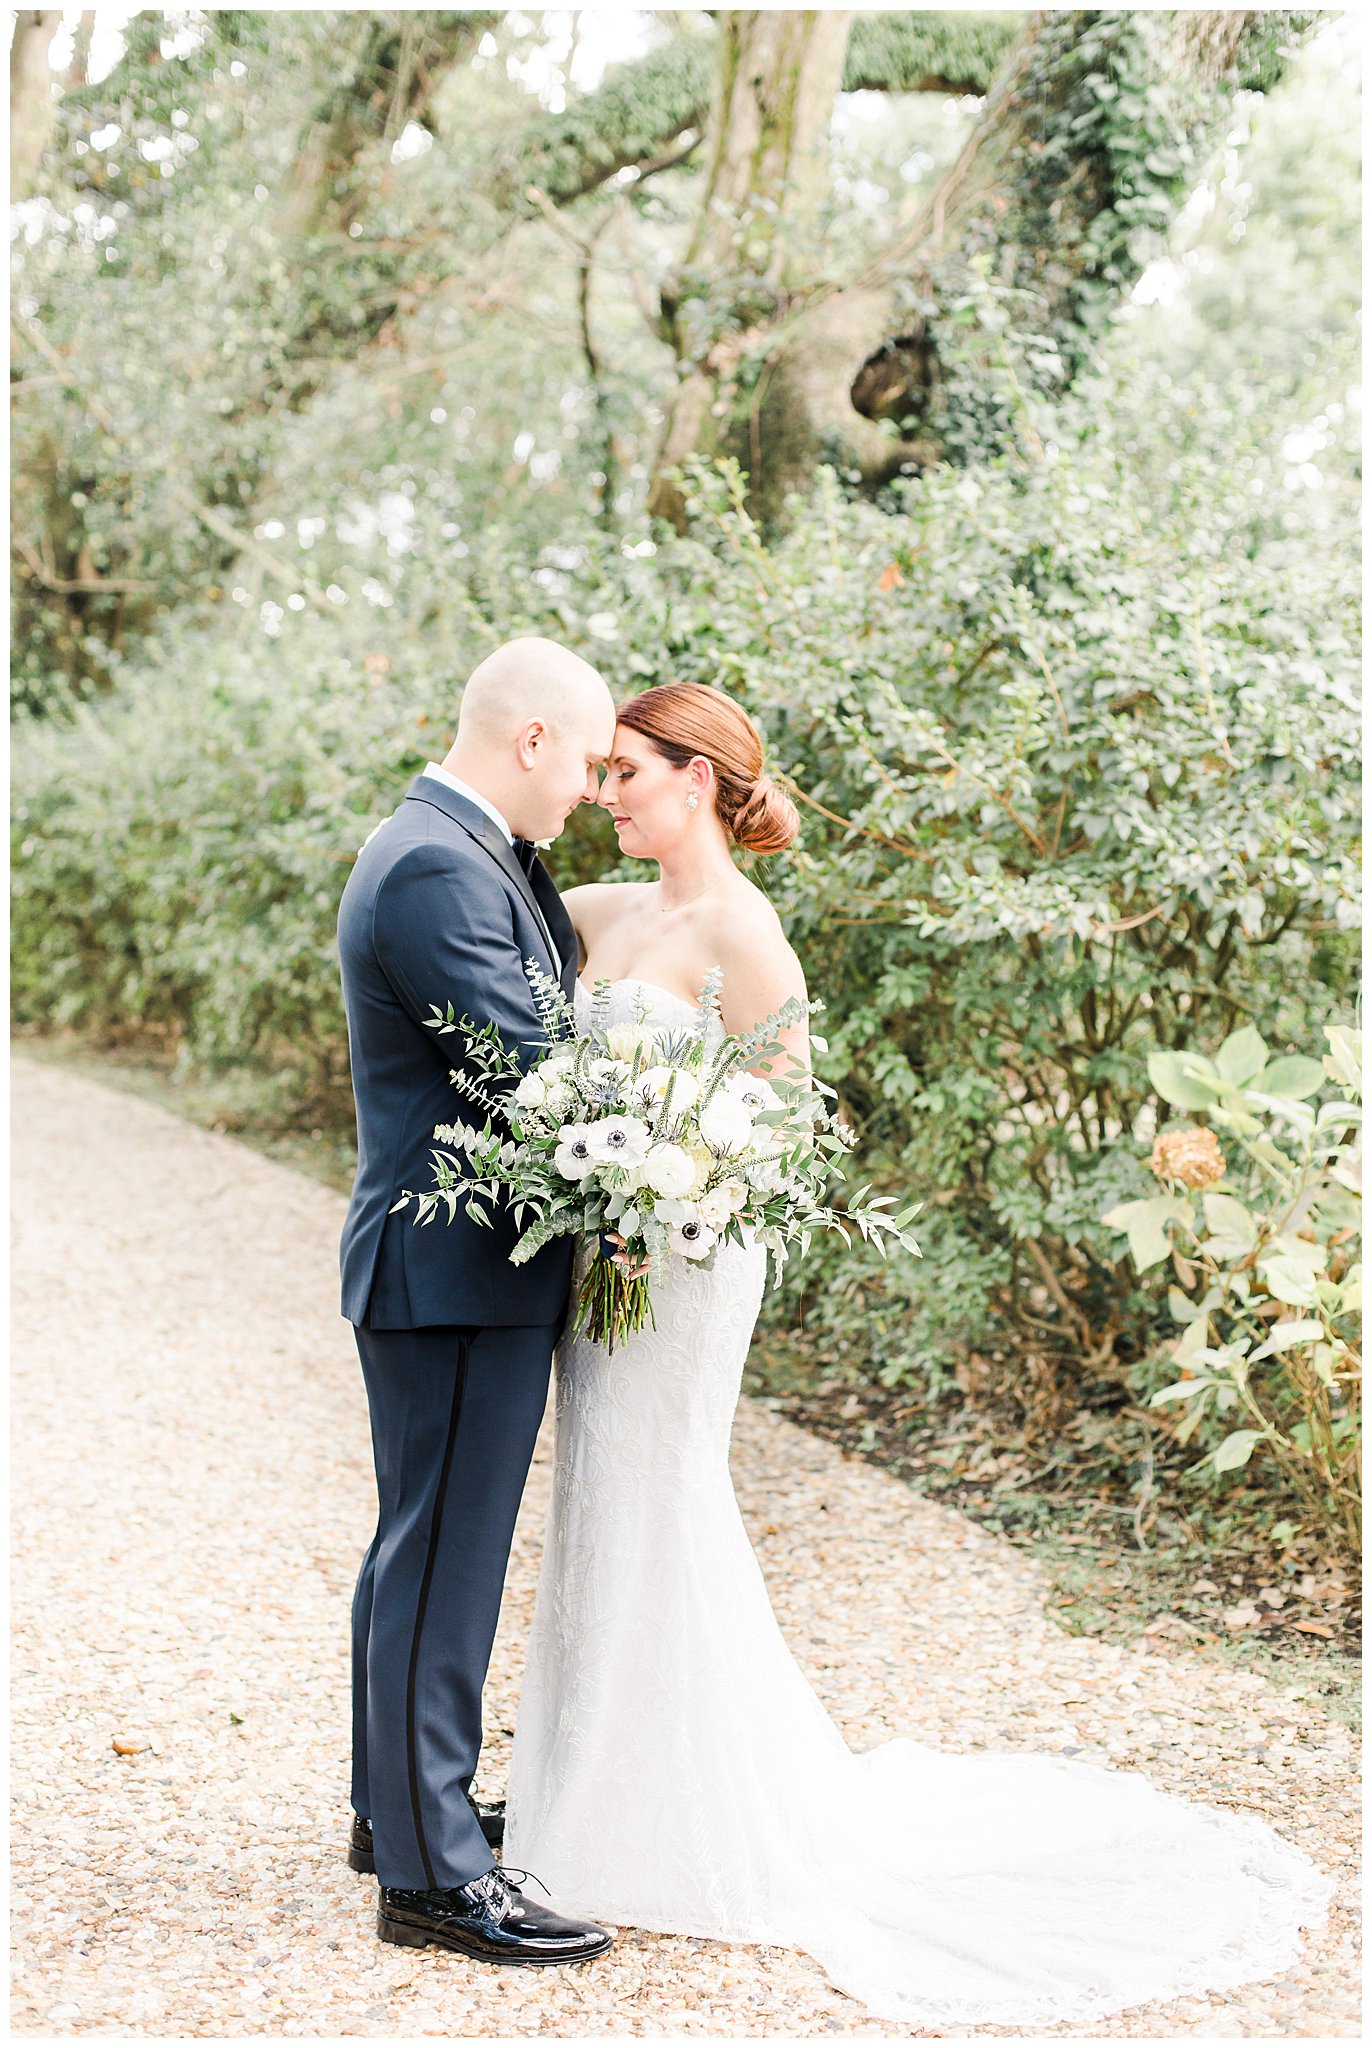 Bragg Mitchell Mansion Wedding in Mobile, AL | Chasity Beard Photography